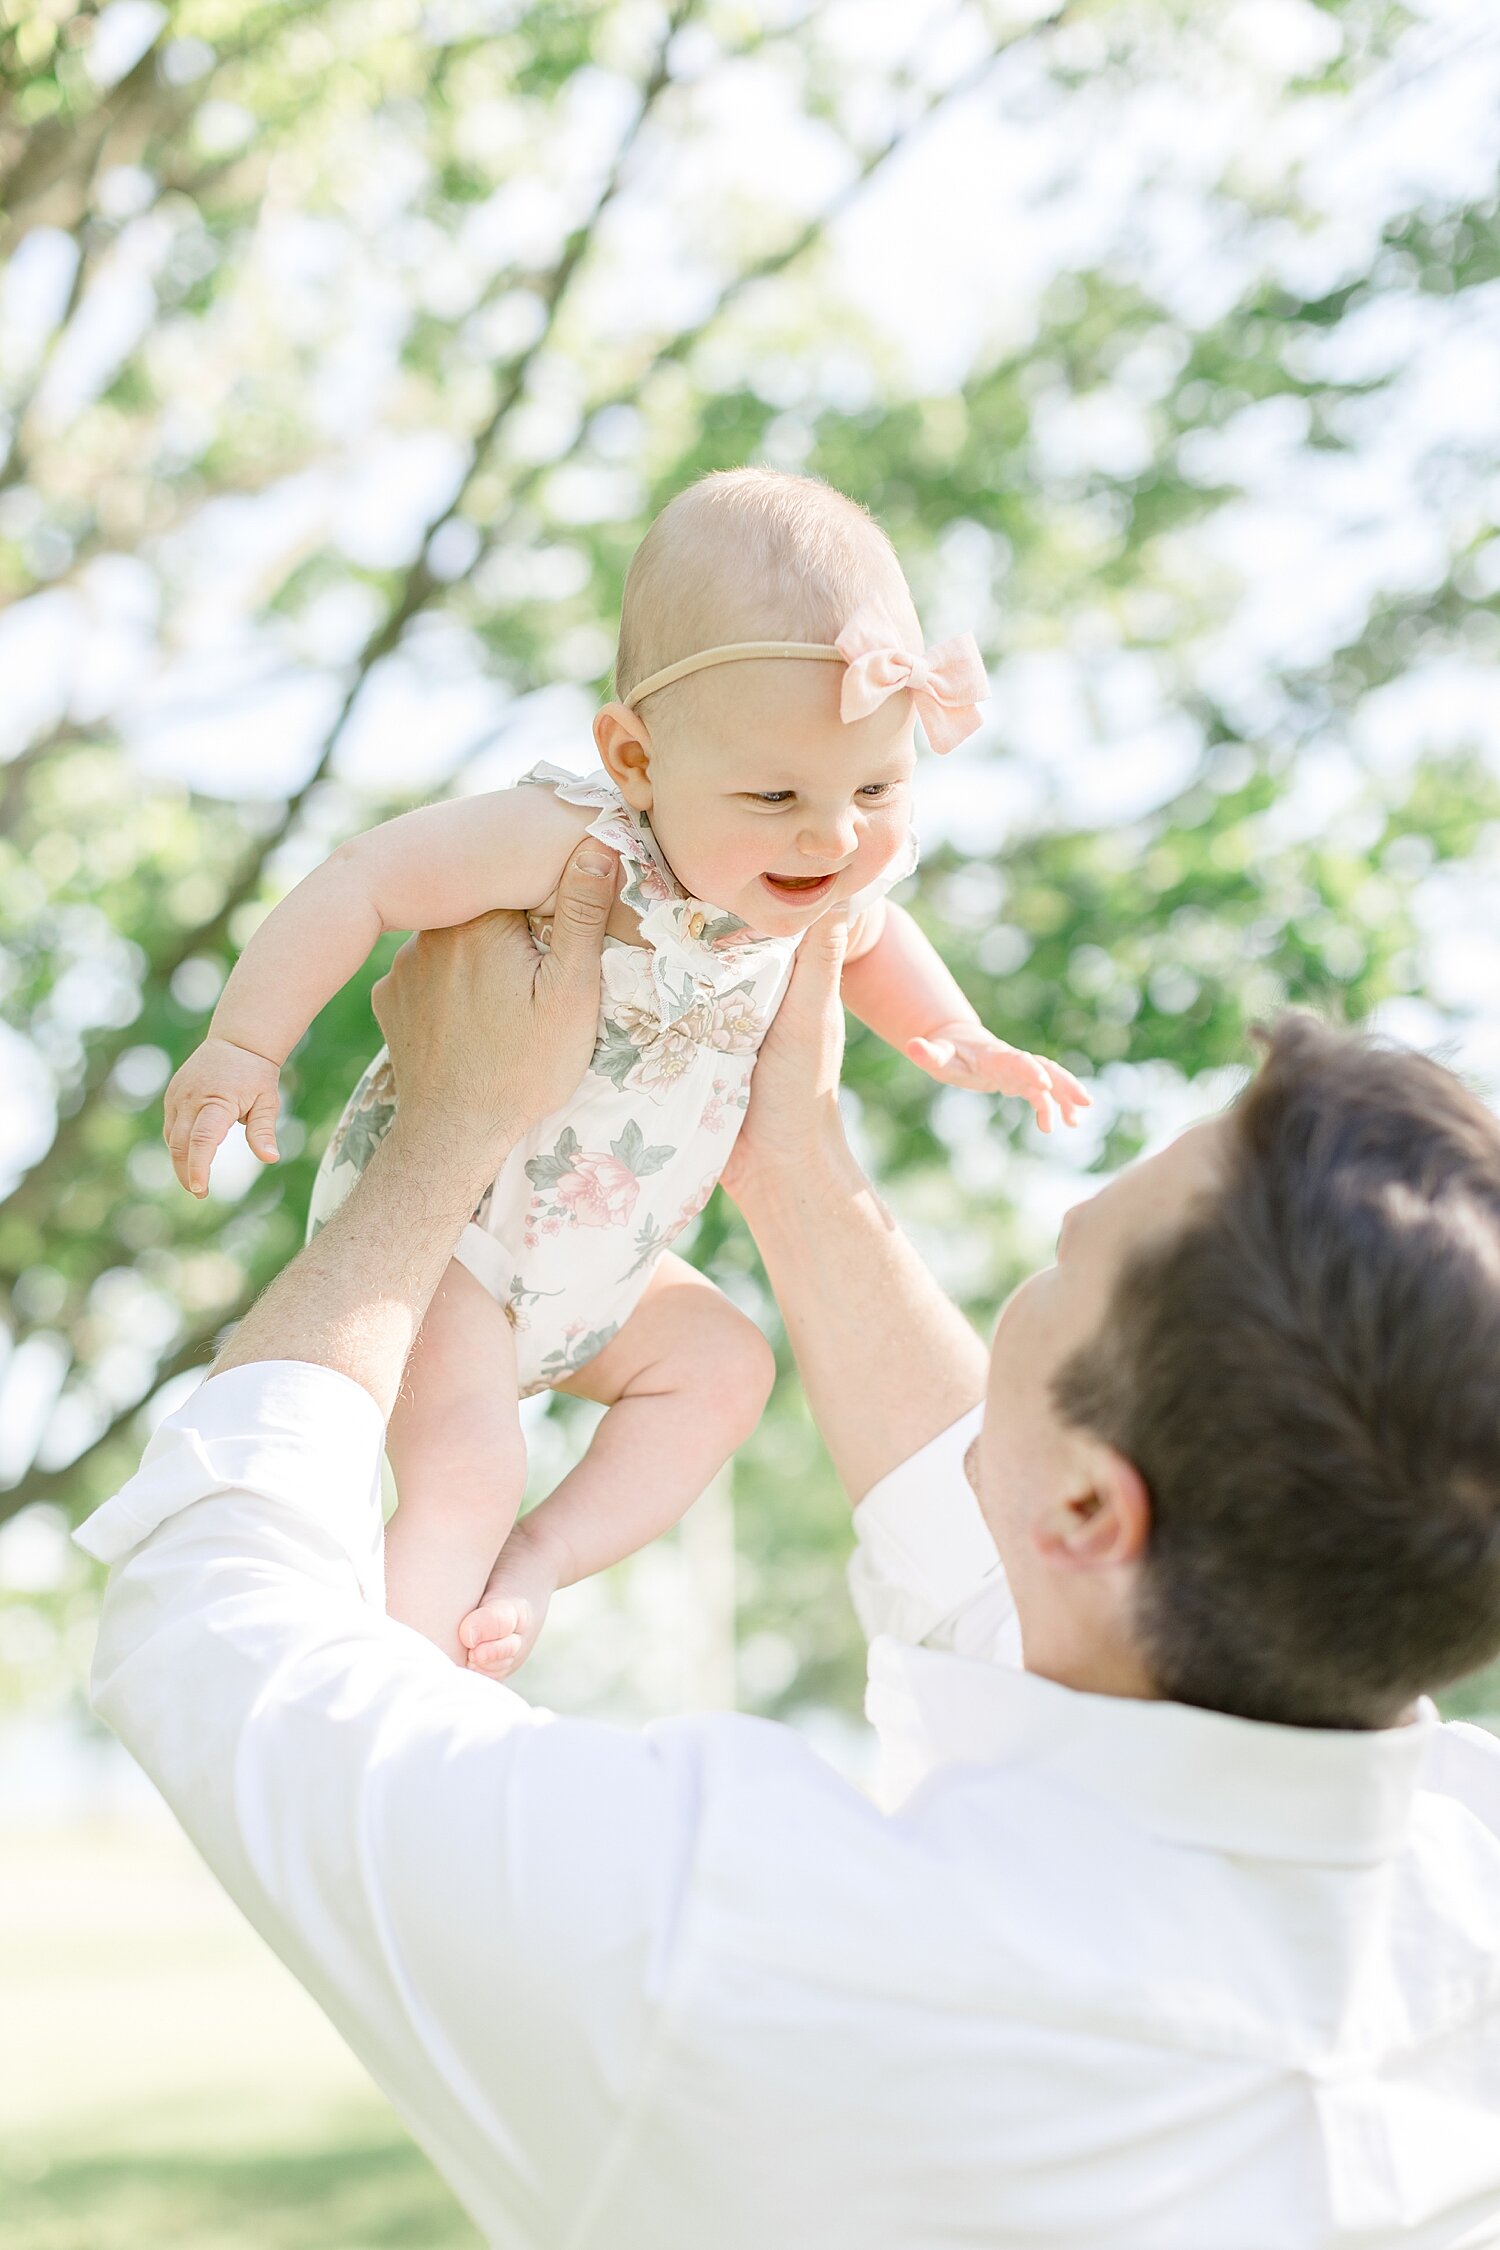 Dad holding up six month old baby girl | Kristin Wood Photography